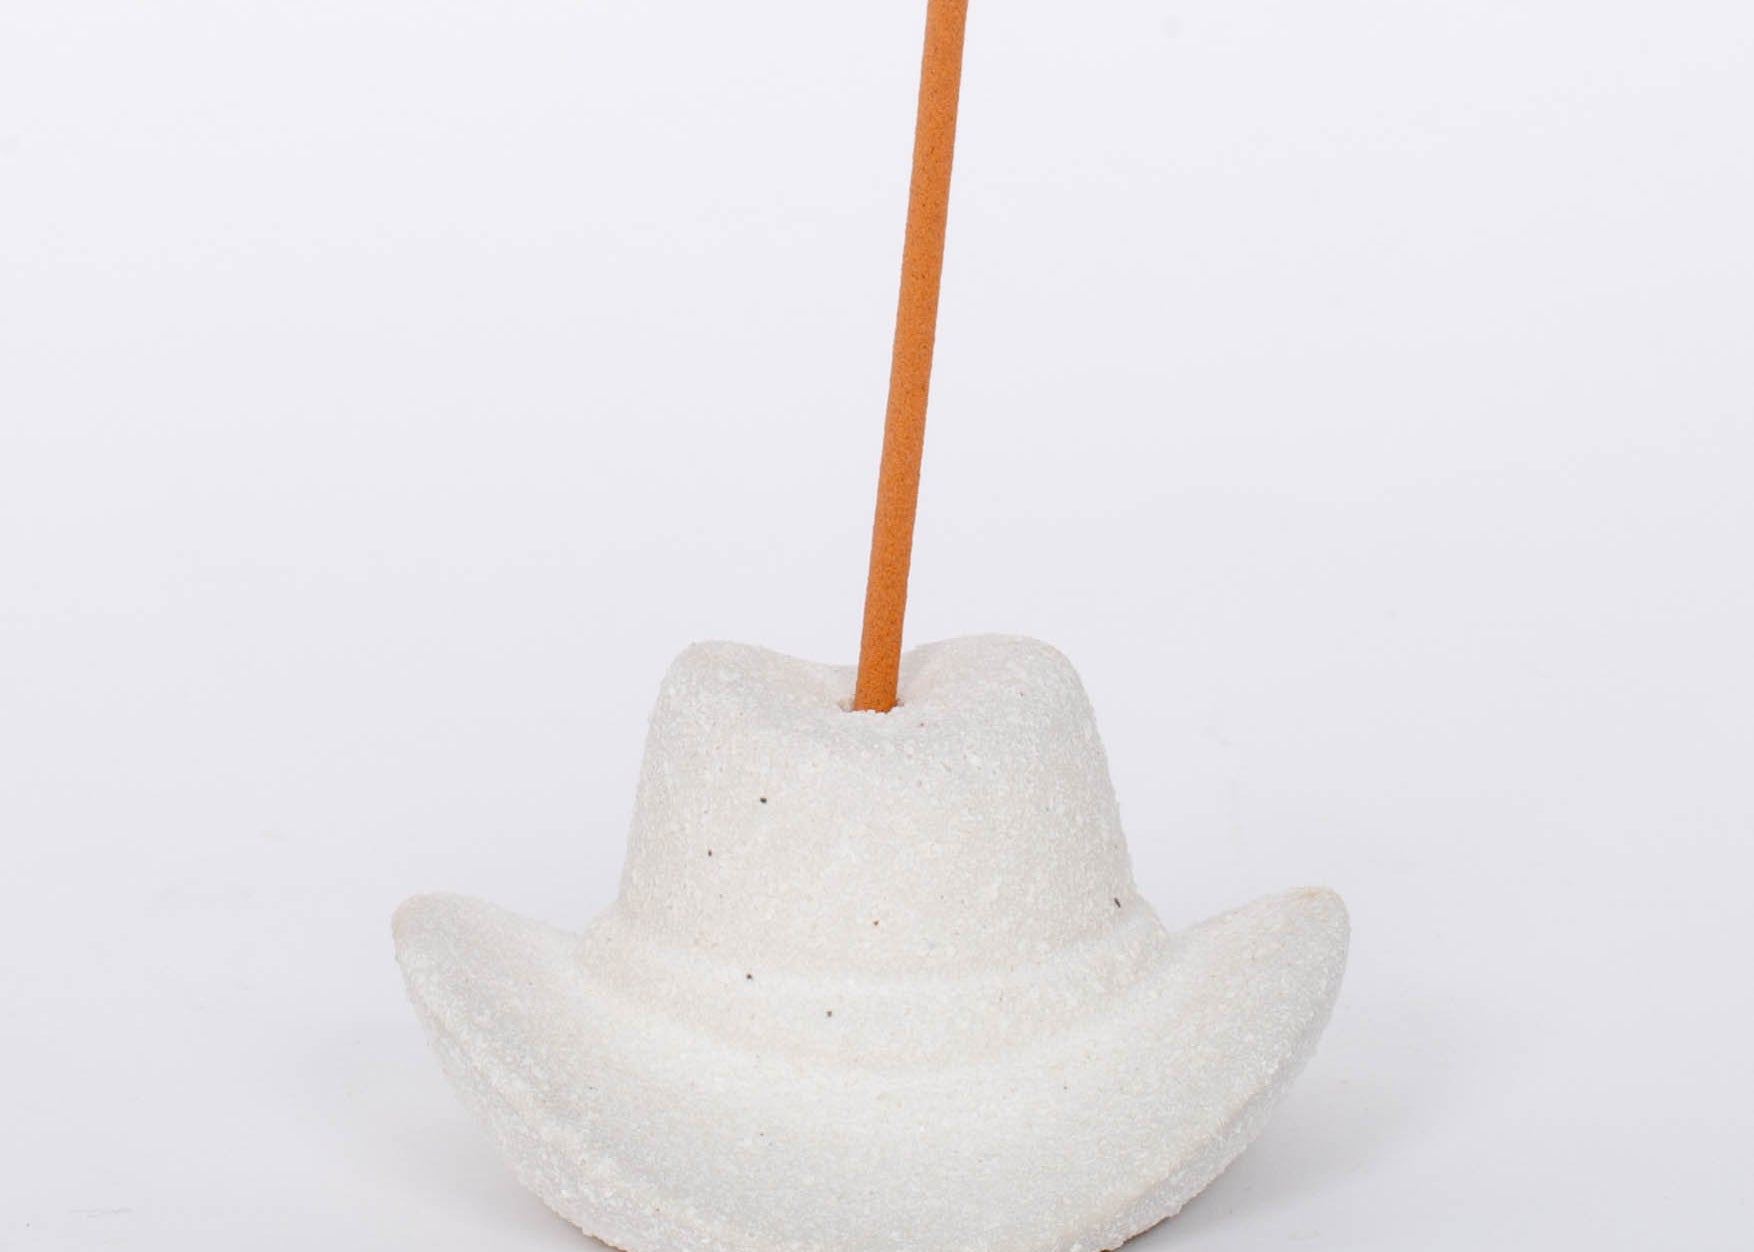 White Cowboy Hat Incense Holder This vintage-inspired incense burner is on of our favorites! Including 100 fragrant incense sticks of Palo Santo Suede, this ceramic incense holder will keep your space burning with ambiance and fragrant tones.